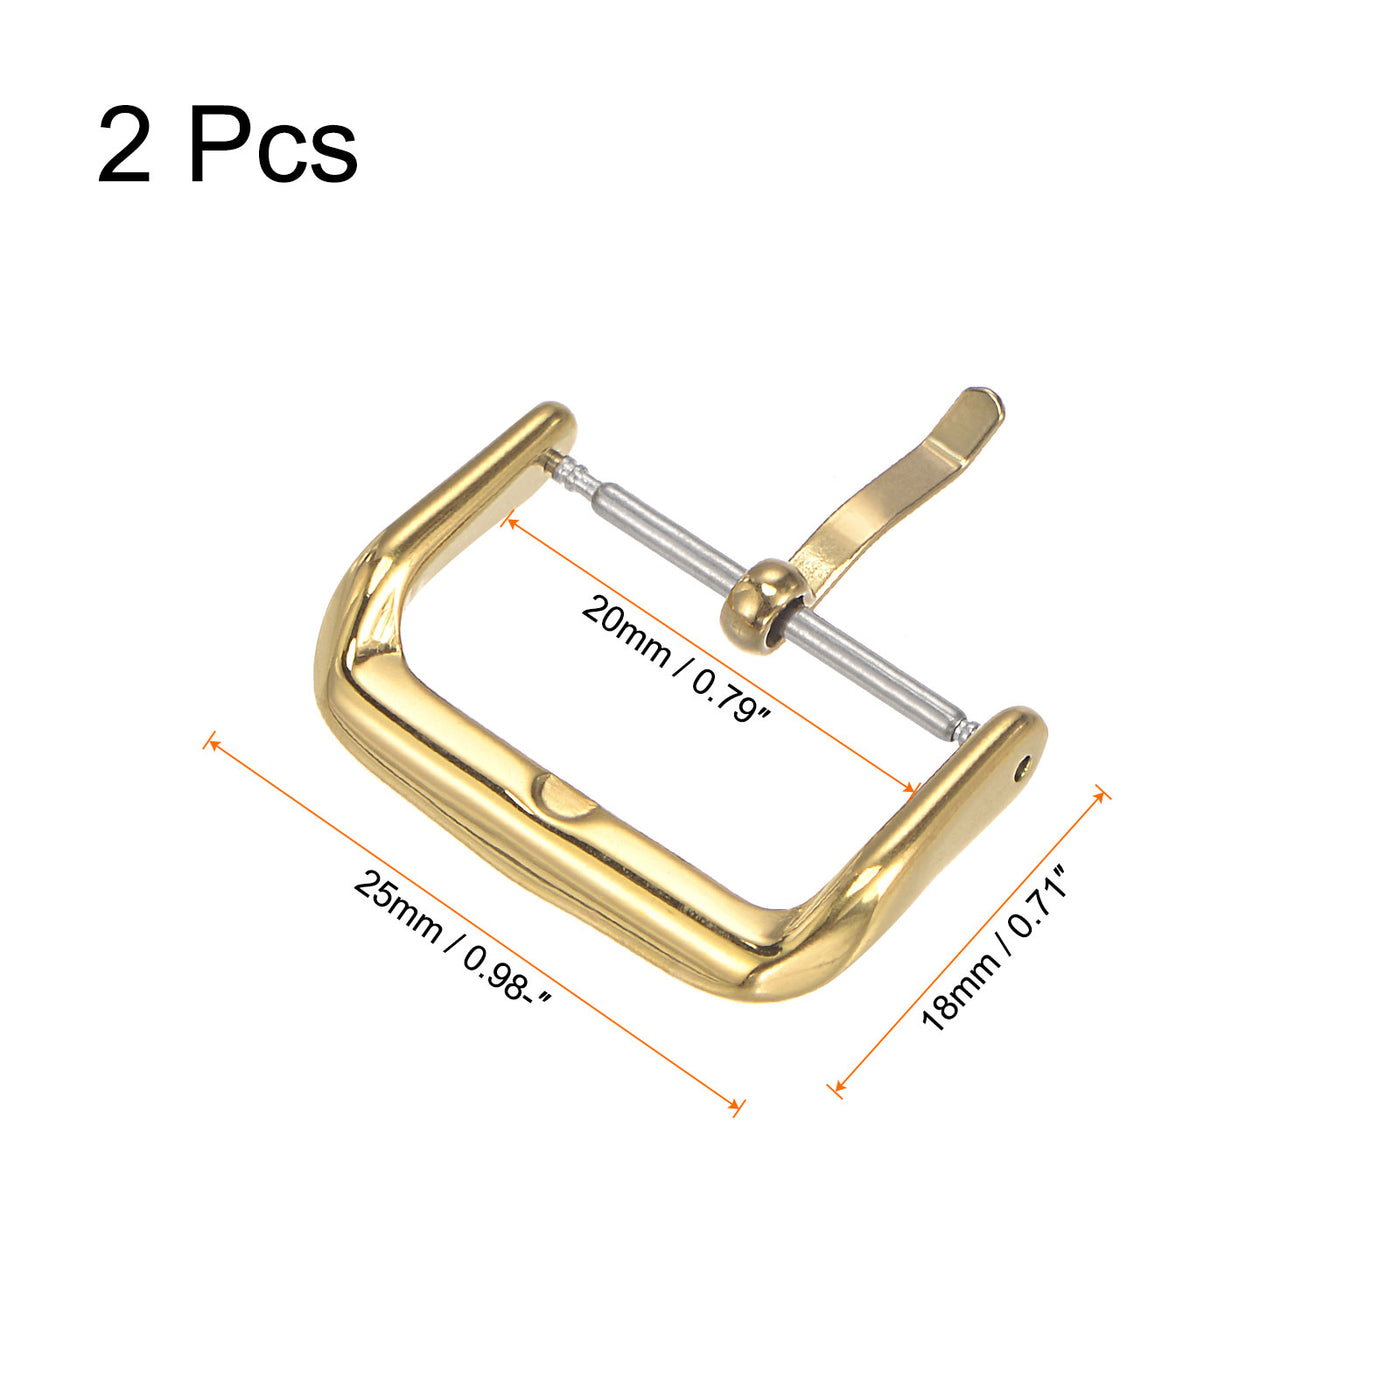 Uxcell Uxcell Watch SUS316 Polished PVD Buckle, Gold Tone for 12mm Width Watch Bands 2 Pcs